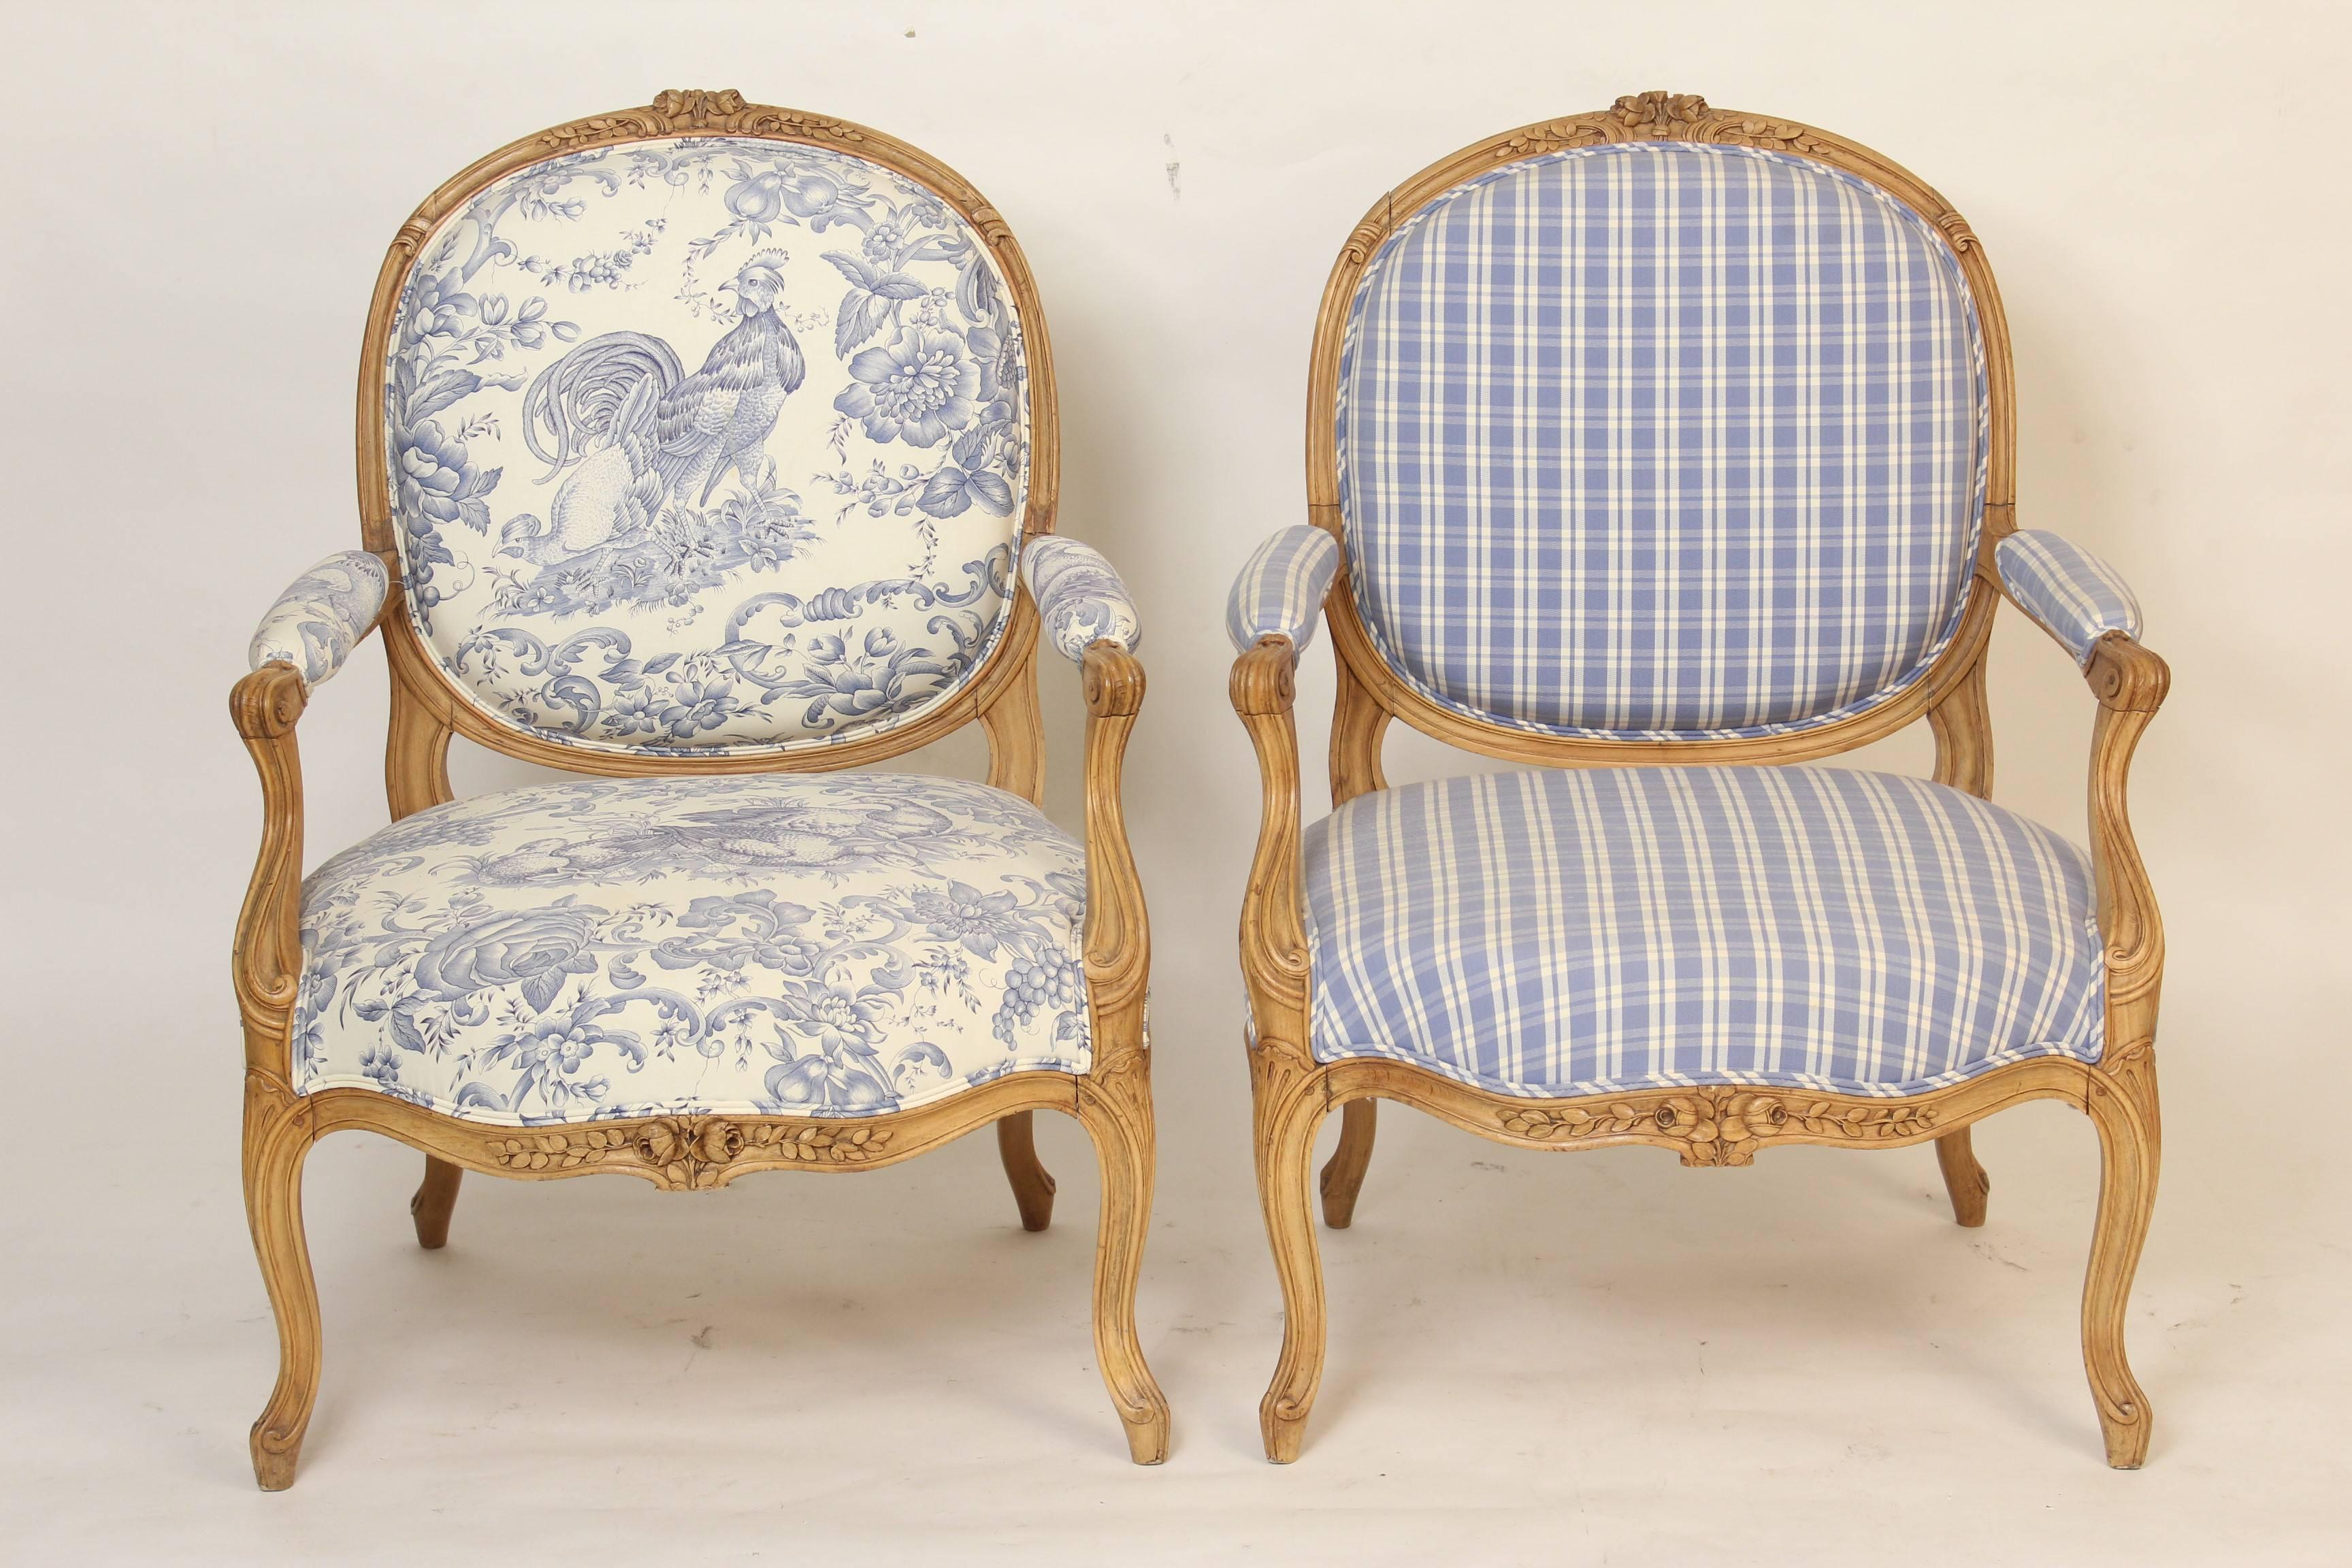 Pair of Louis XV style bleached beechwood armchairs, circa 1930s. Please note the frames match the upholstery doesn't. These chairs have good scale and are comfortable to sit in.